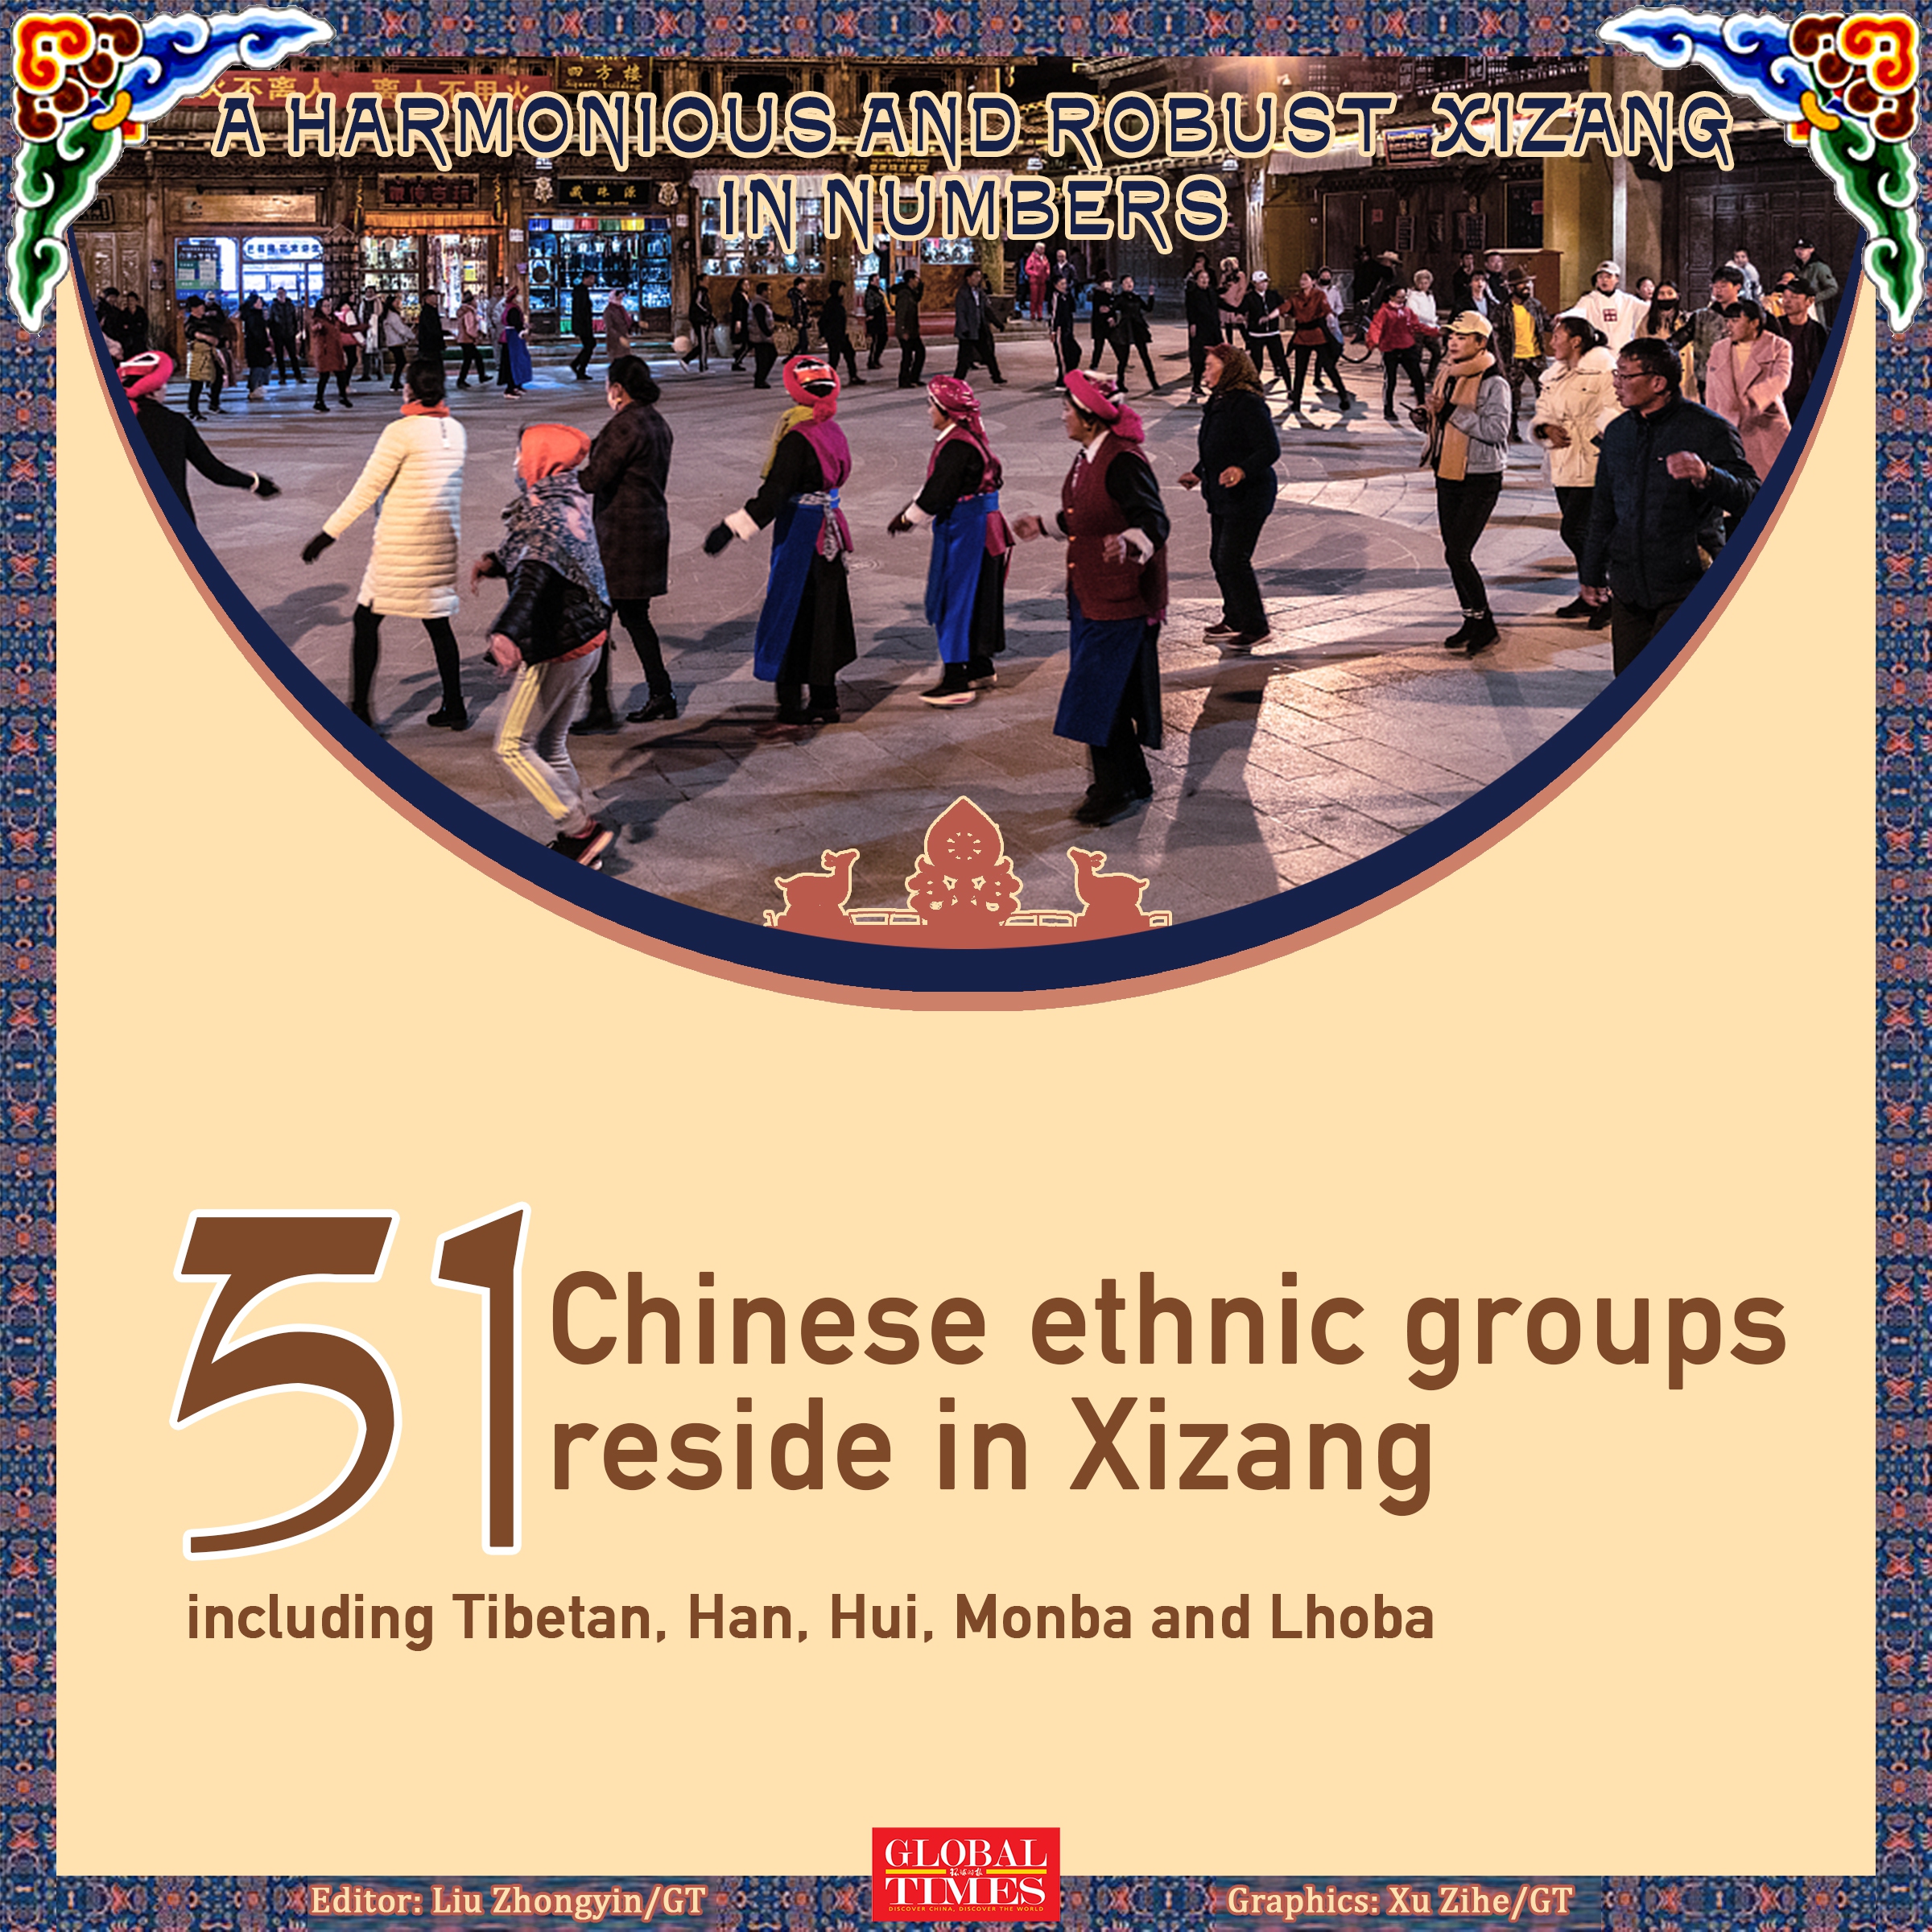 A harmonious and robust Xizang in numbers Graphic: Xu Zihe/GT